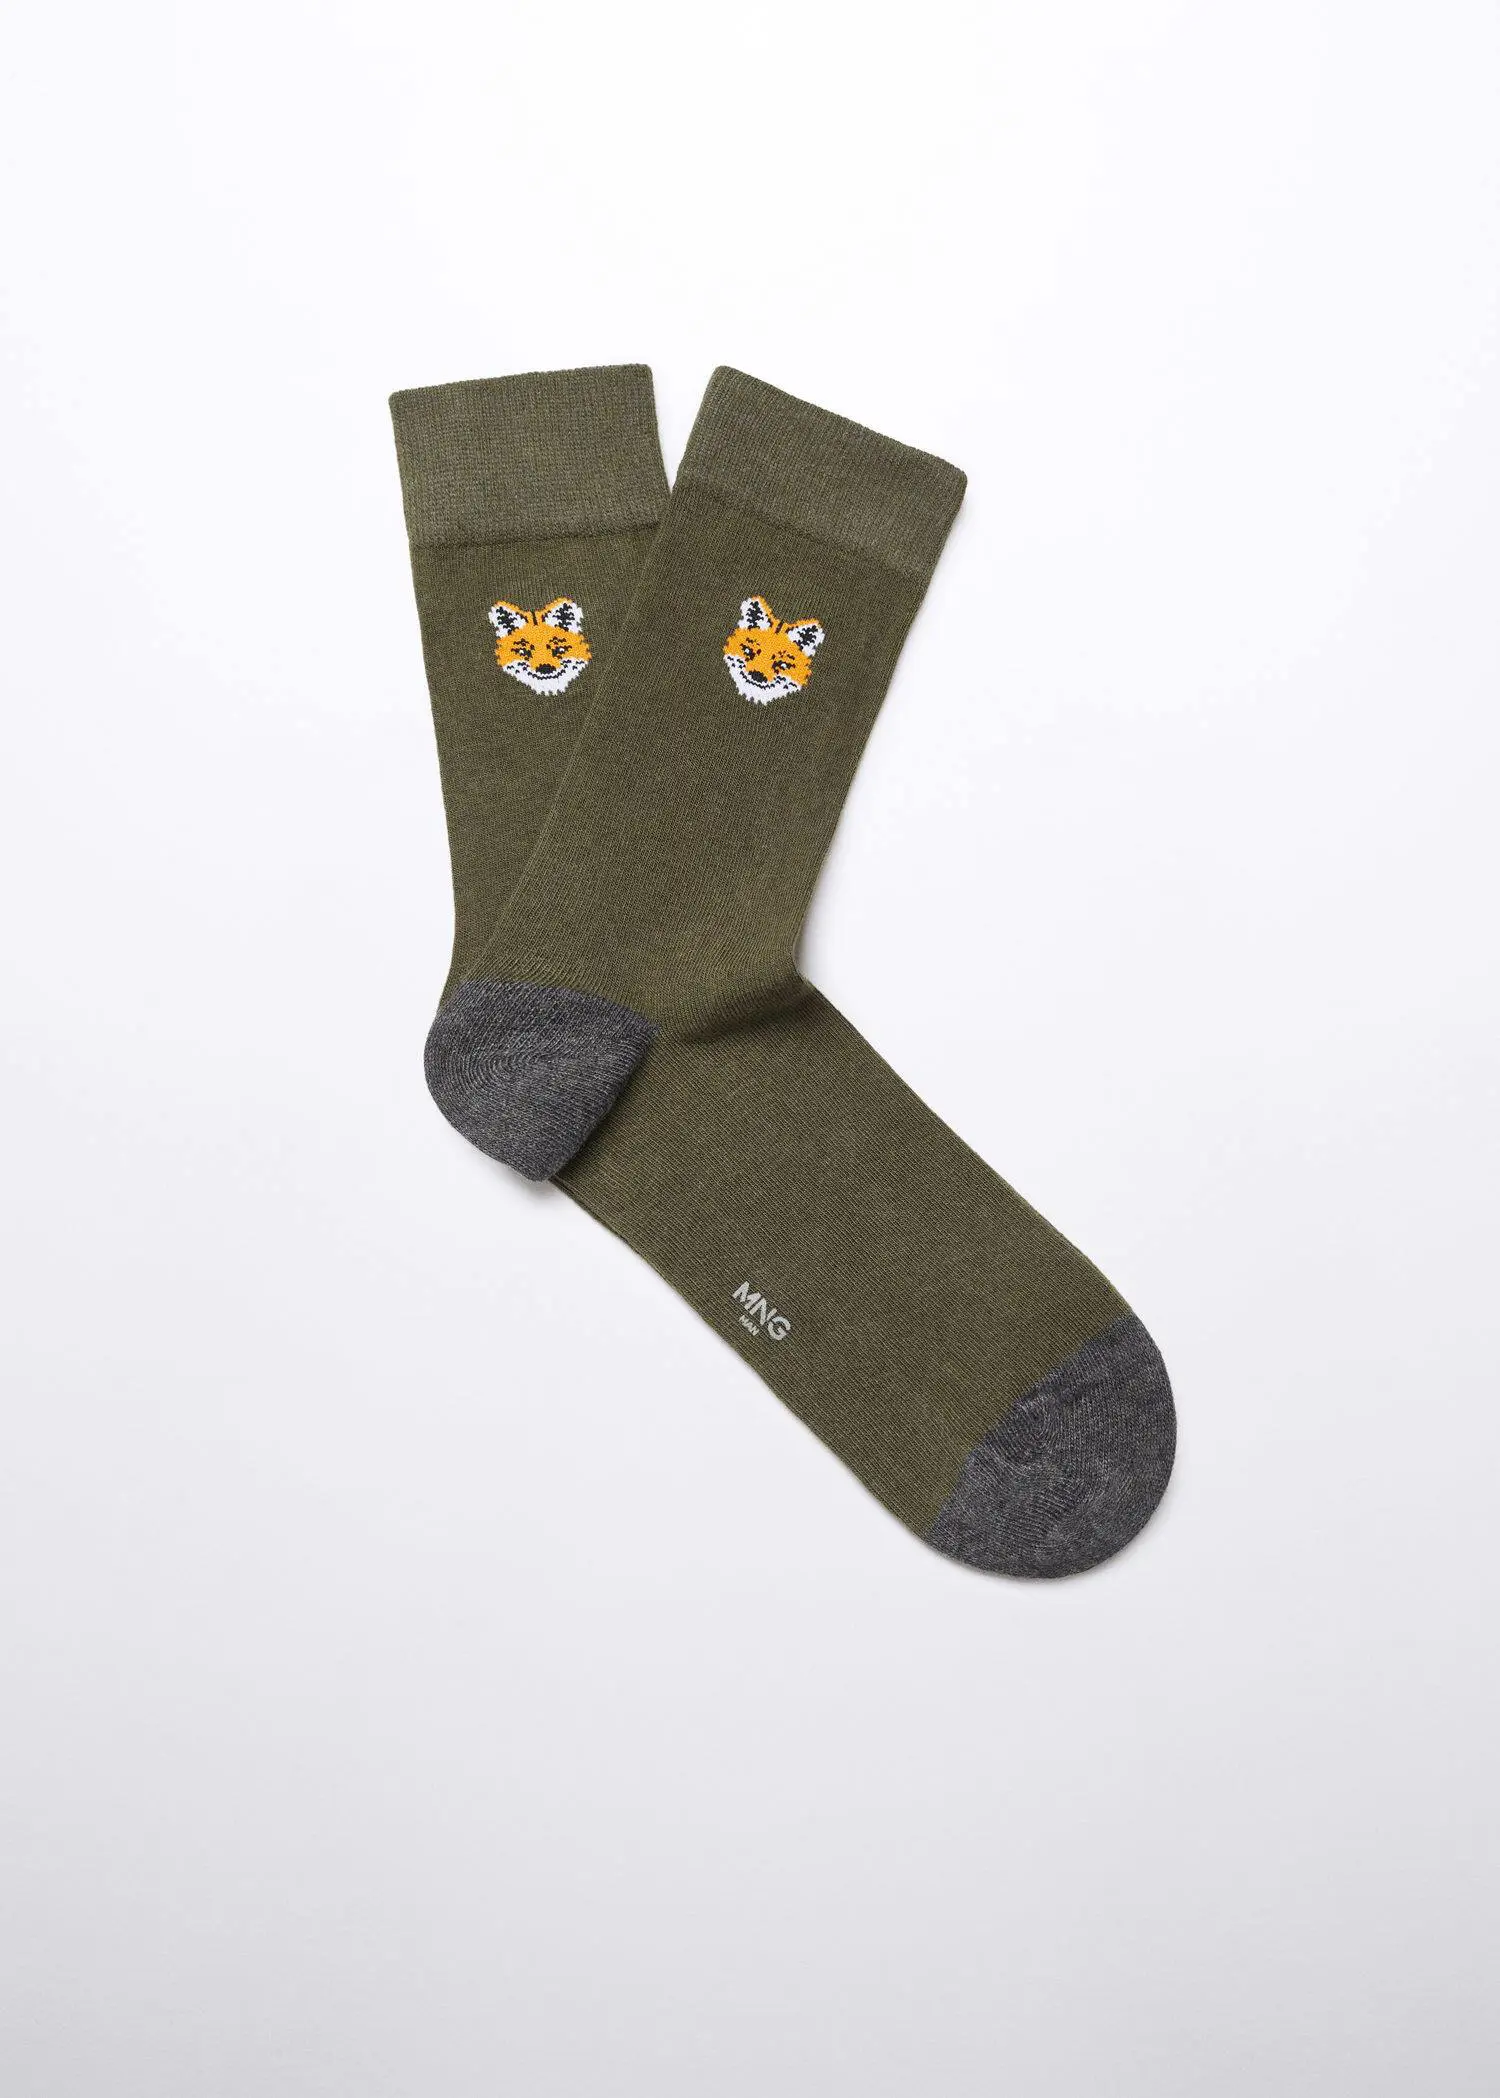 Mango Fox-embroidered cotton socks. a pair of green socks with an orange and white fox on them. 